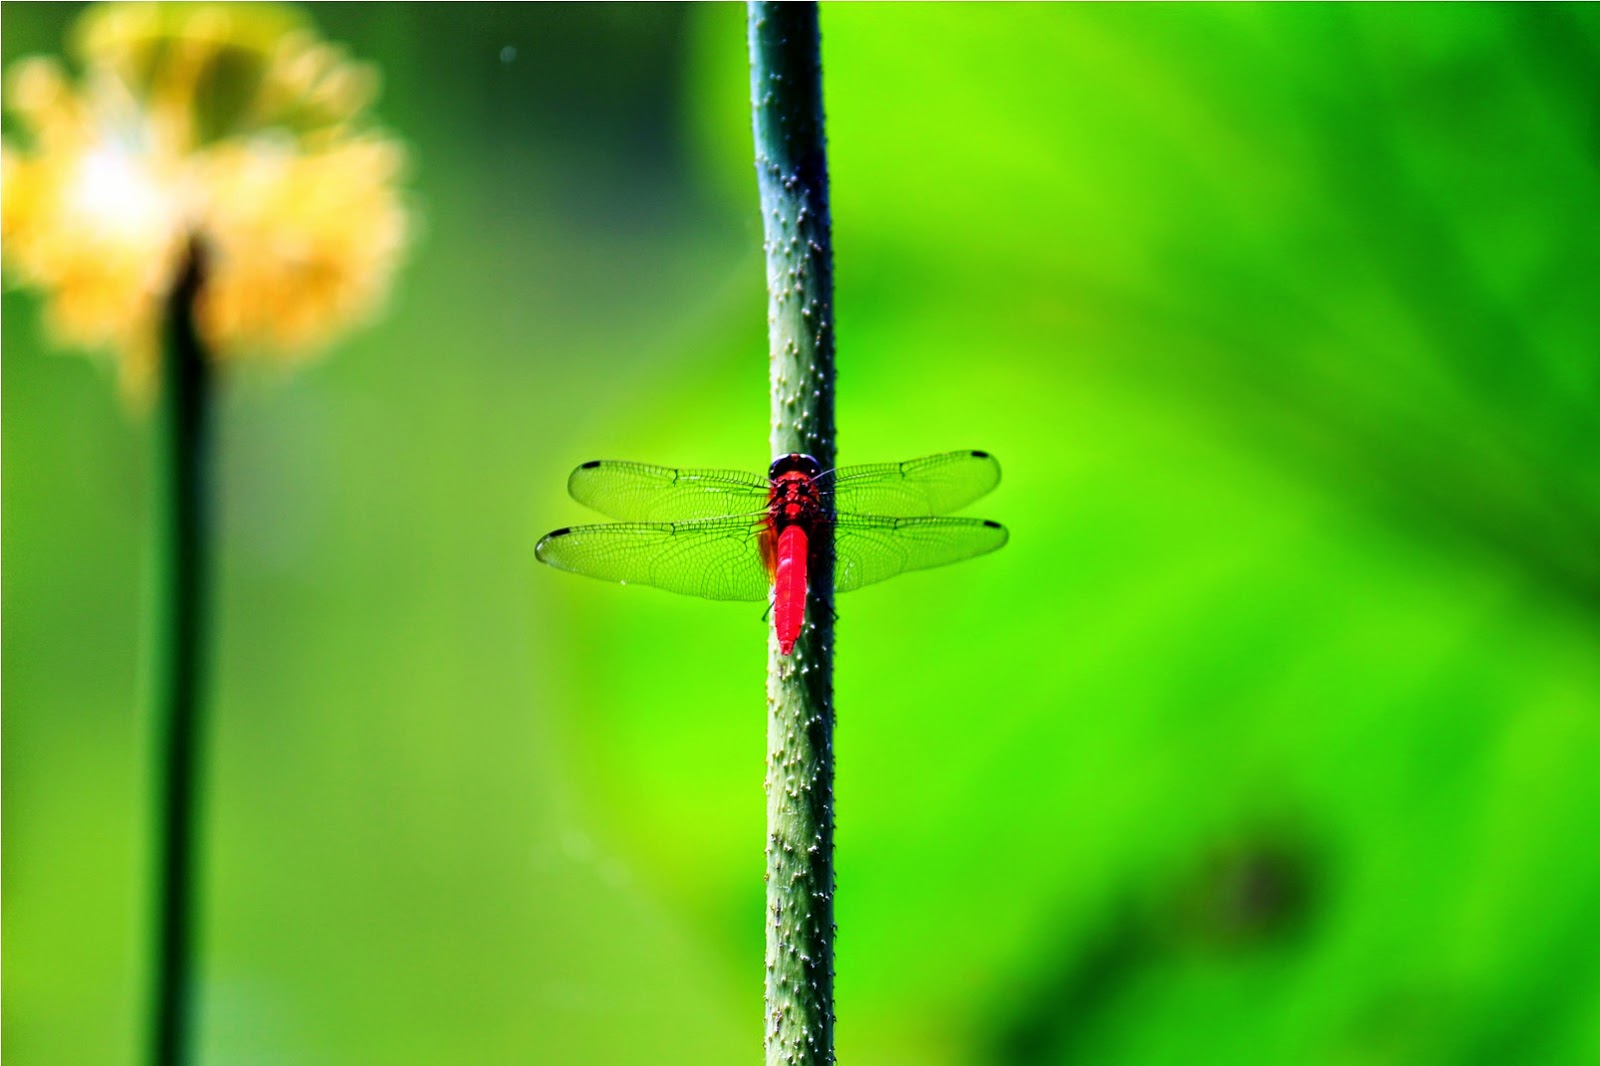    The red dragonfly   